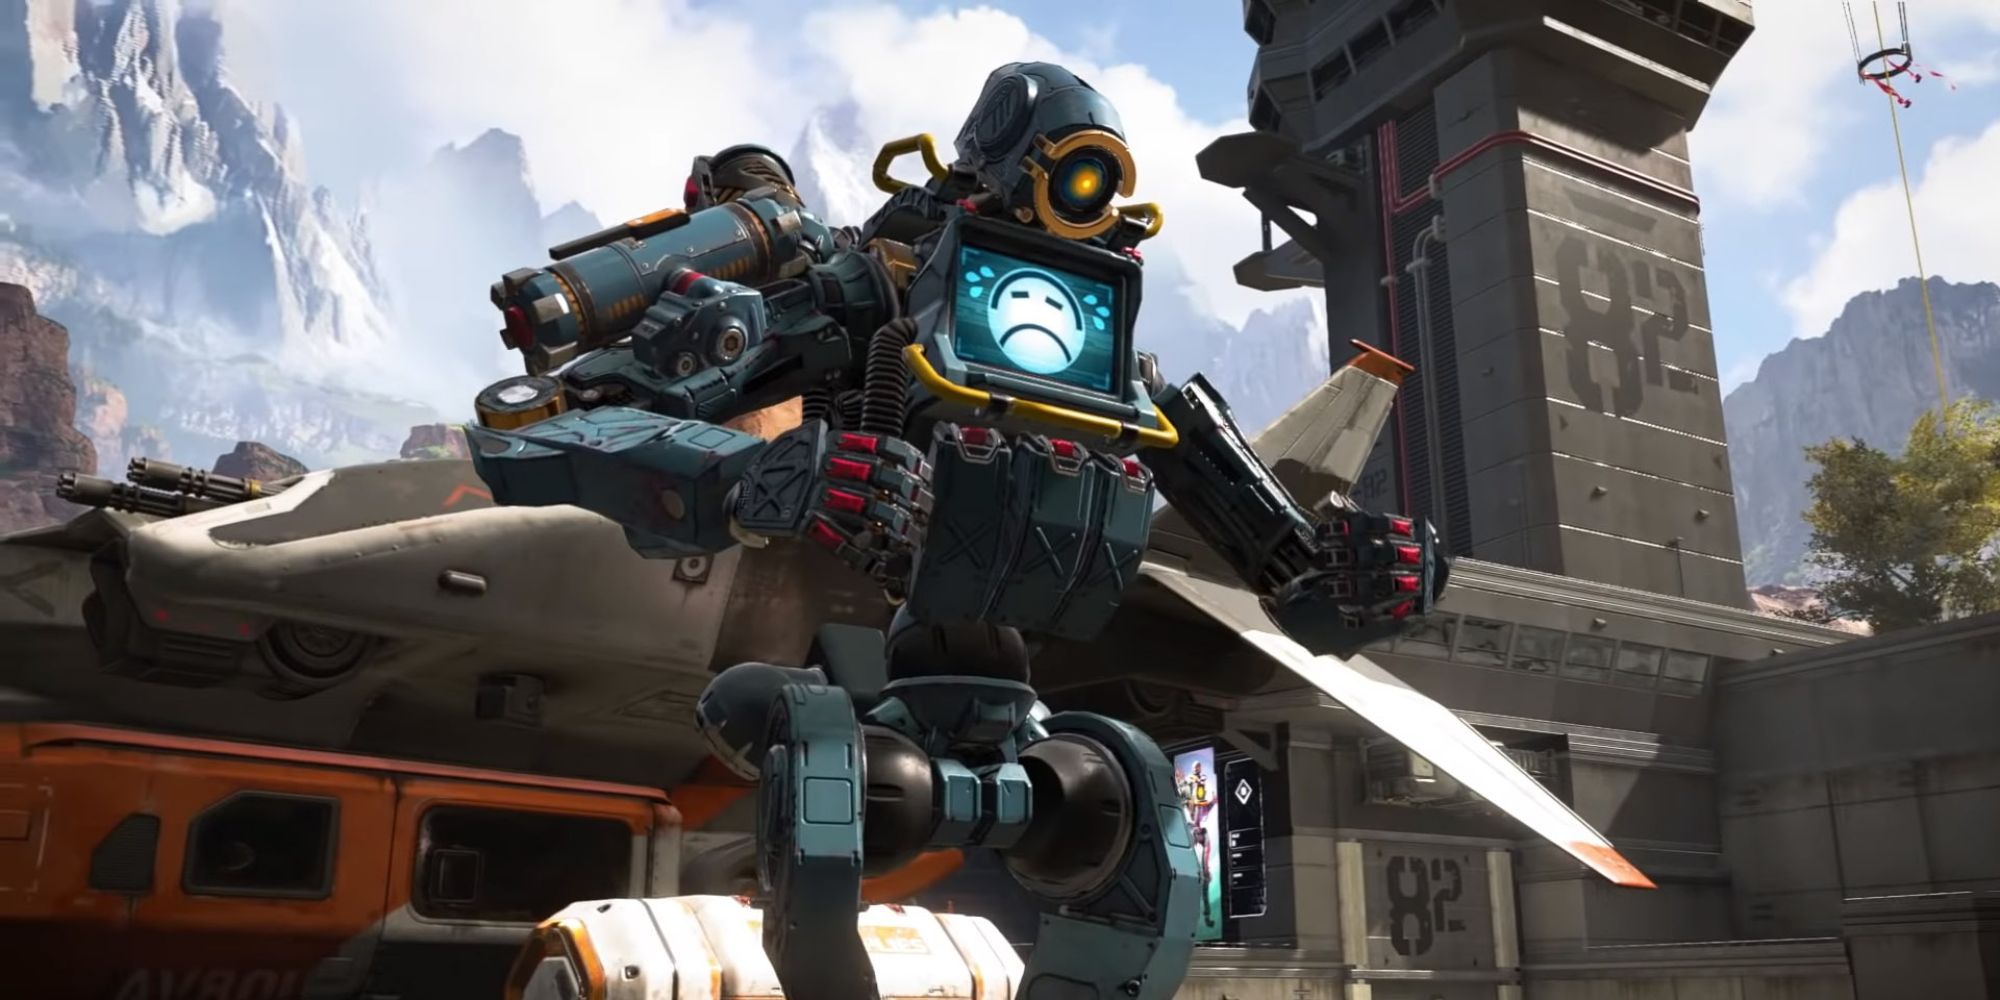 Pathfinder in Apex Legends with a mountainous background